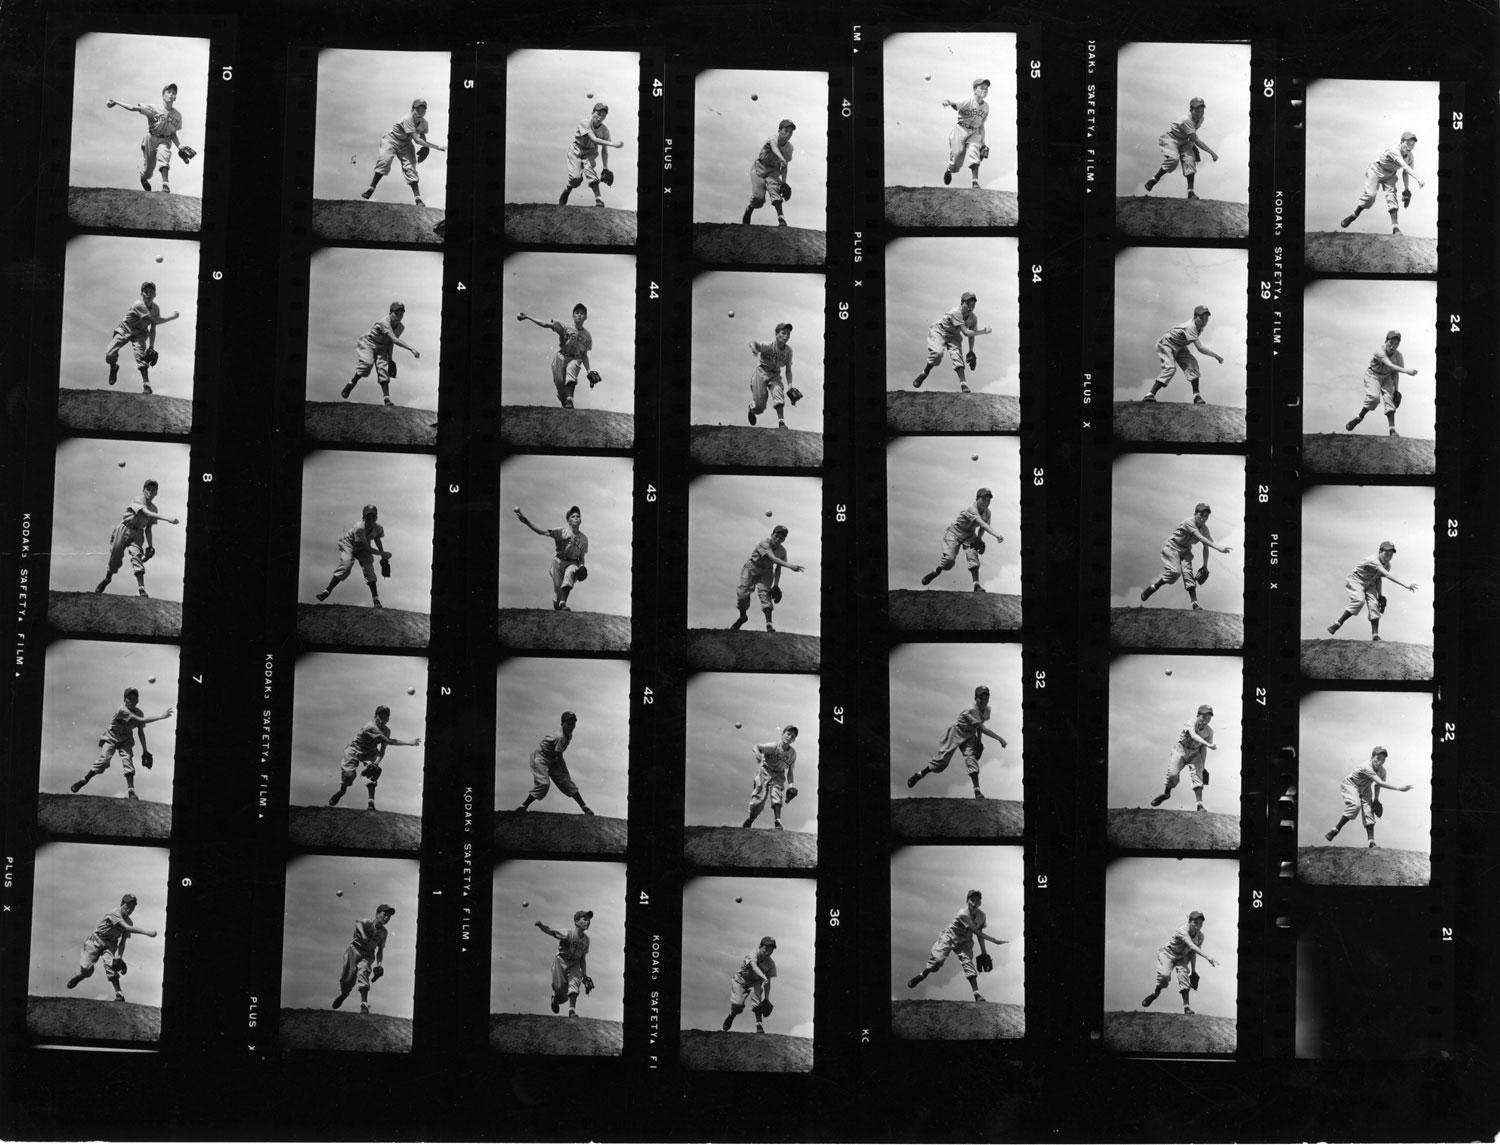 Contact sheet of images by LIFE photographer Yale Joel, 1954.